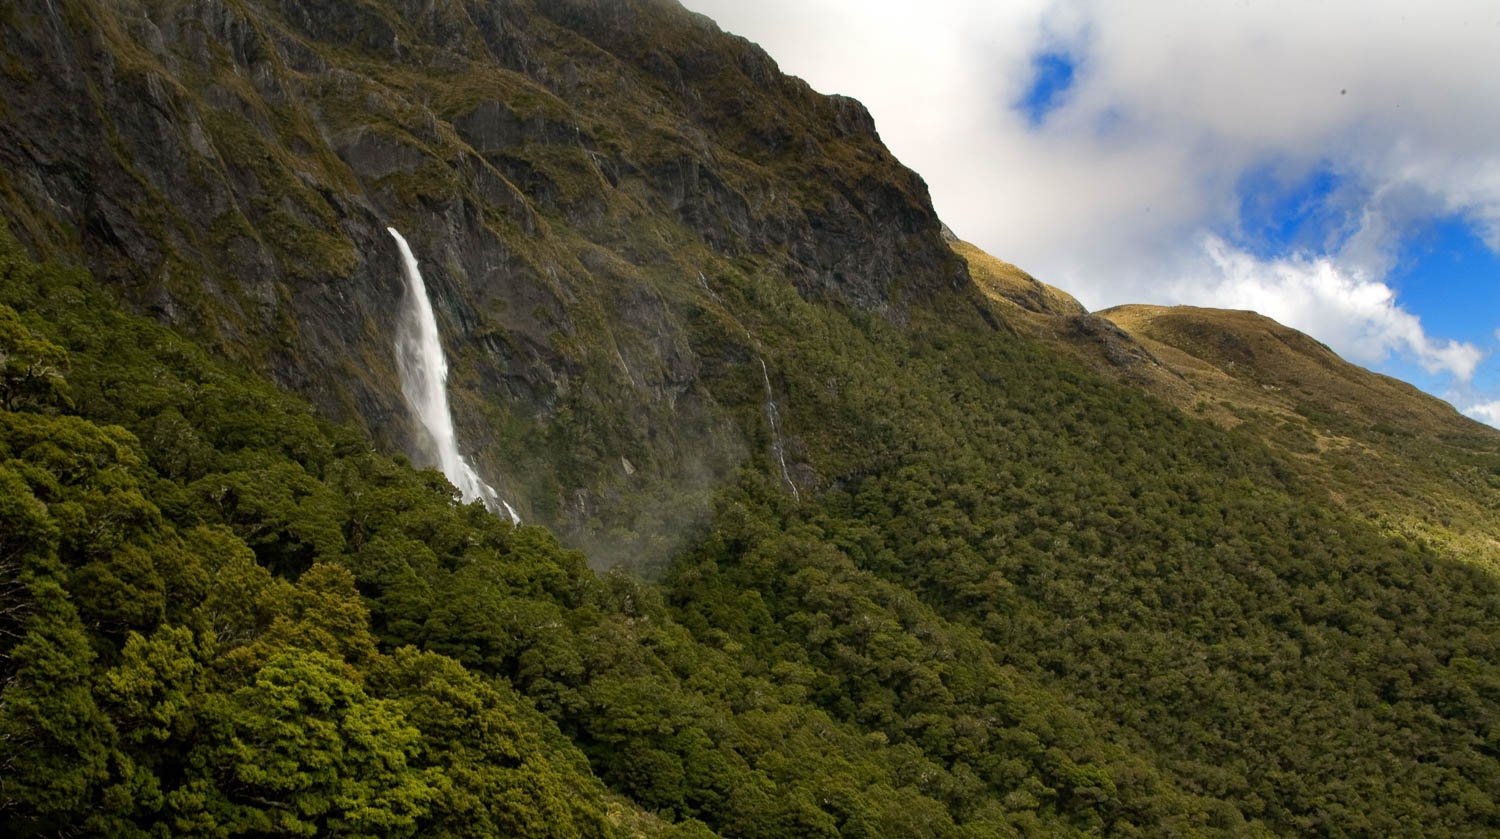 A high mountain fully covered with fresh plants and trees and a waterfall coming from the center of the mountain, Earland Falls, Routeburn Track - New Zealand